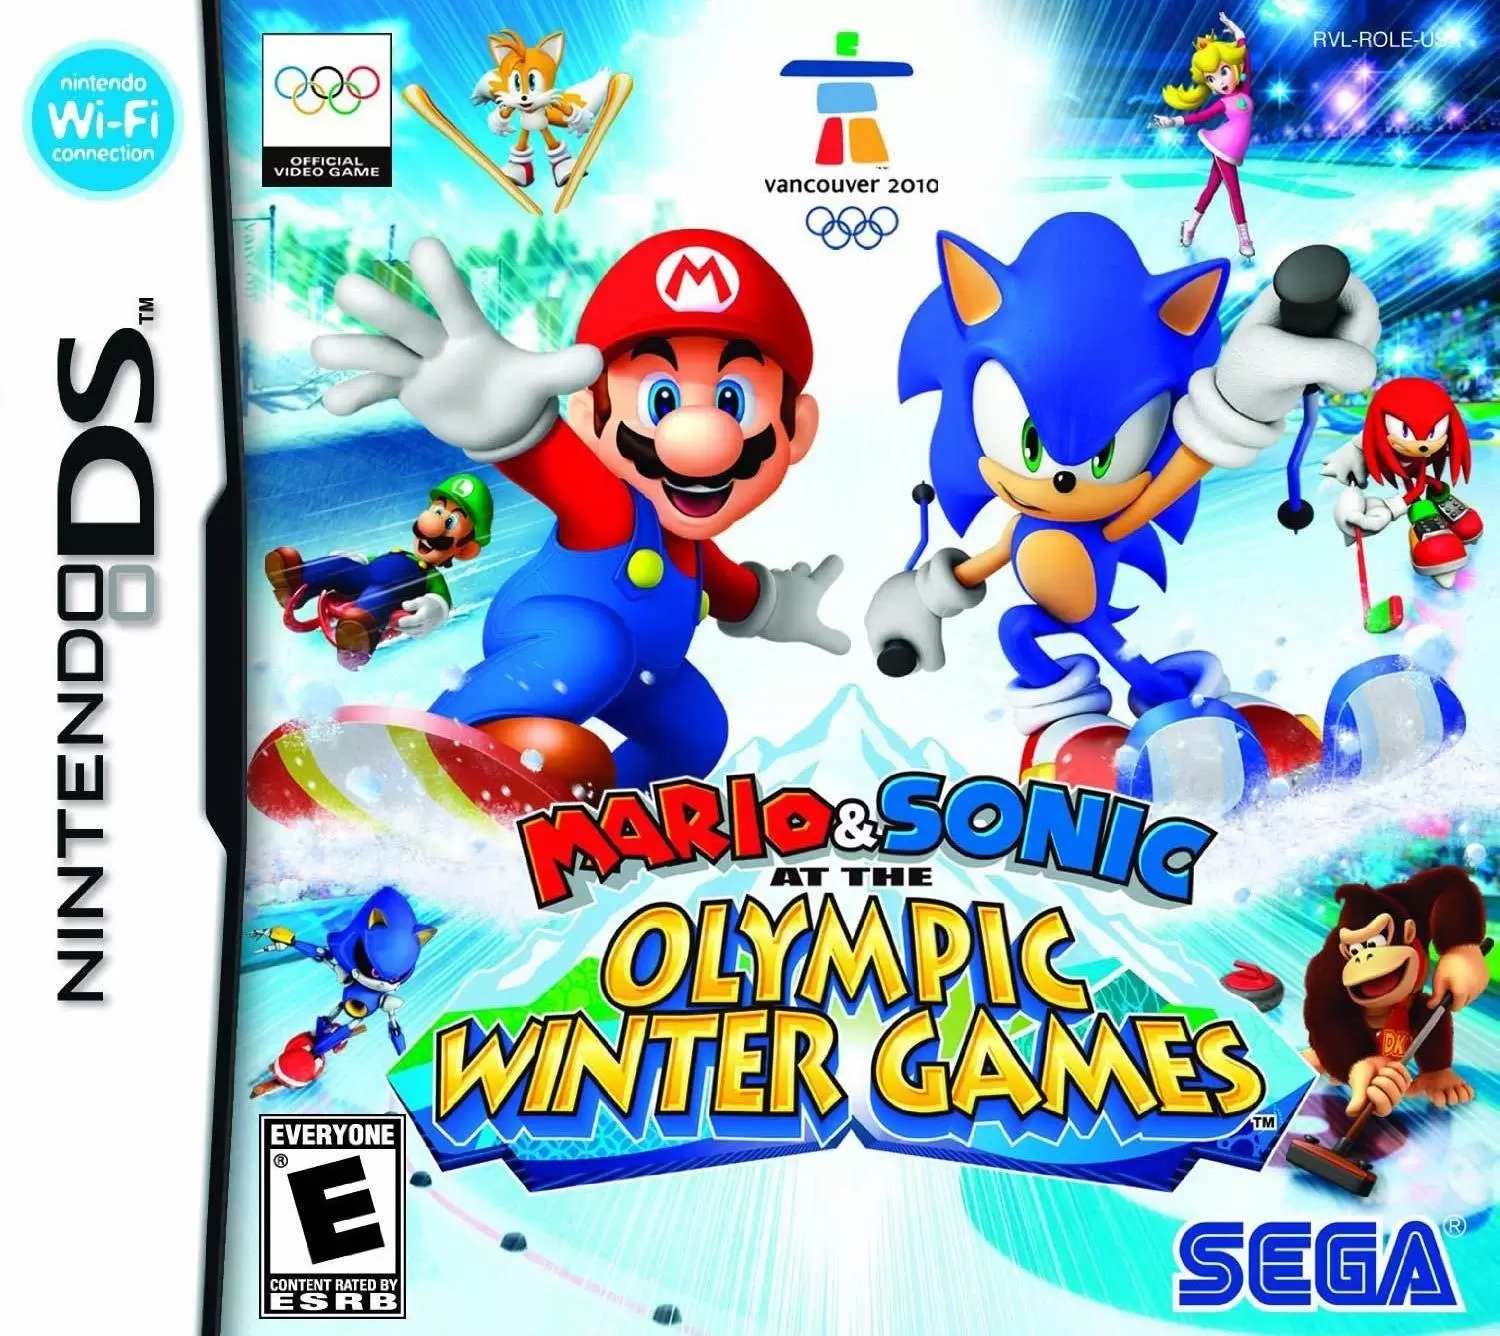 Nintendo DS Games - Mario & Sonic at the Olympic Winter Games